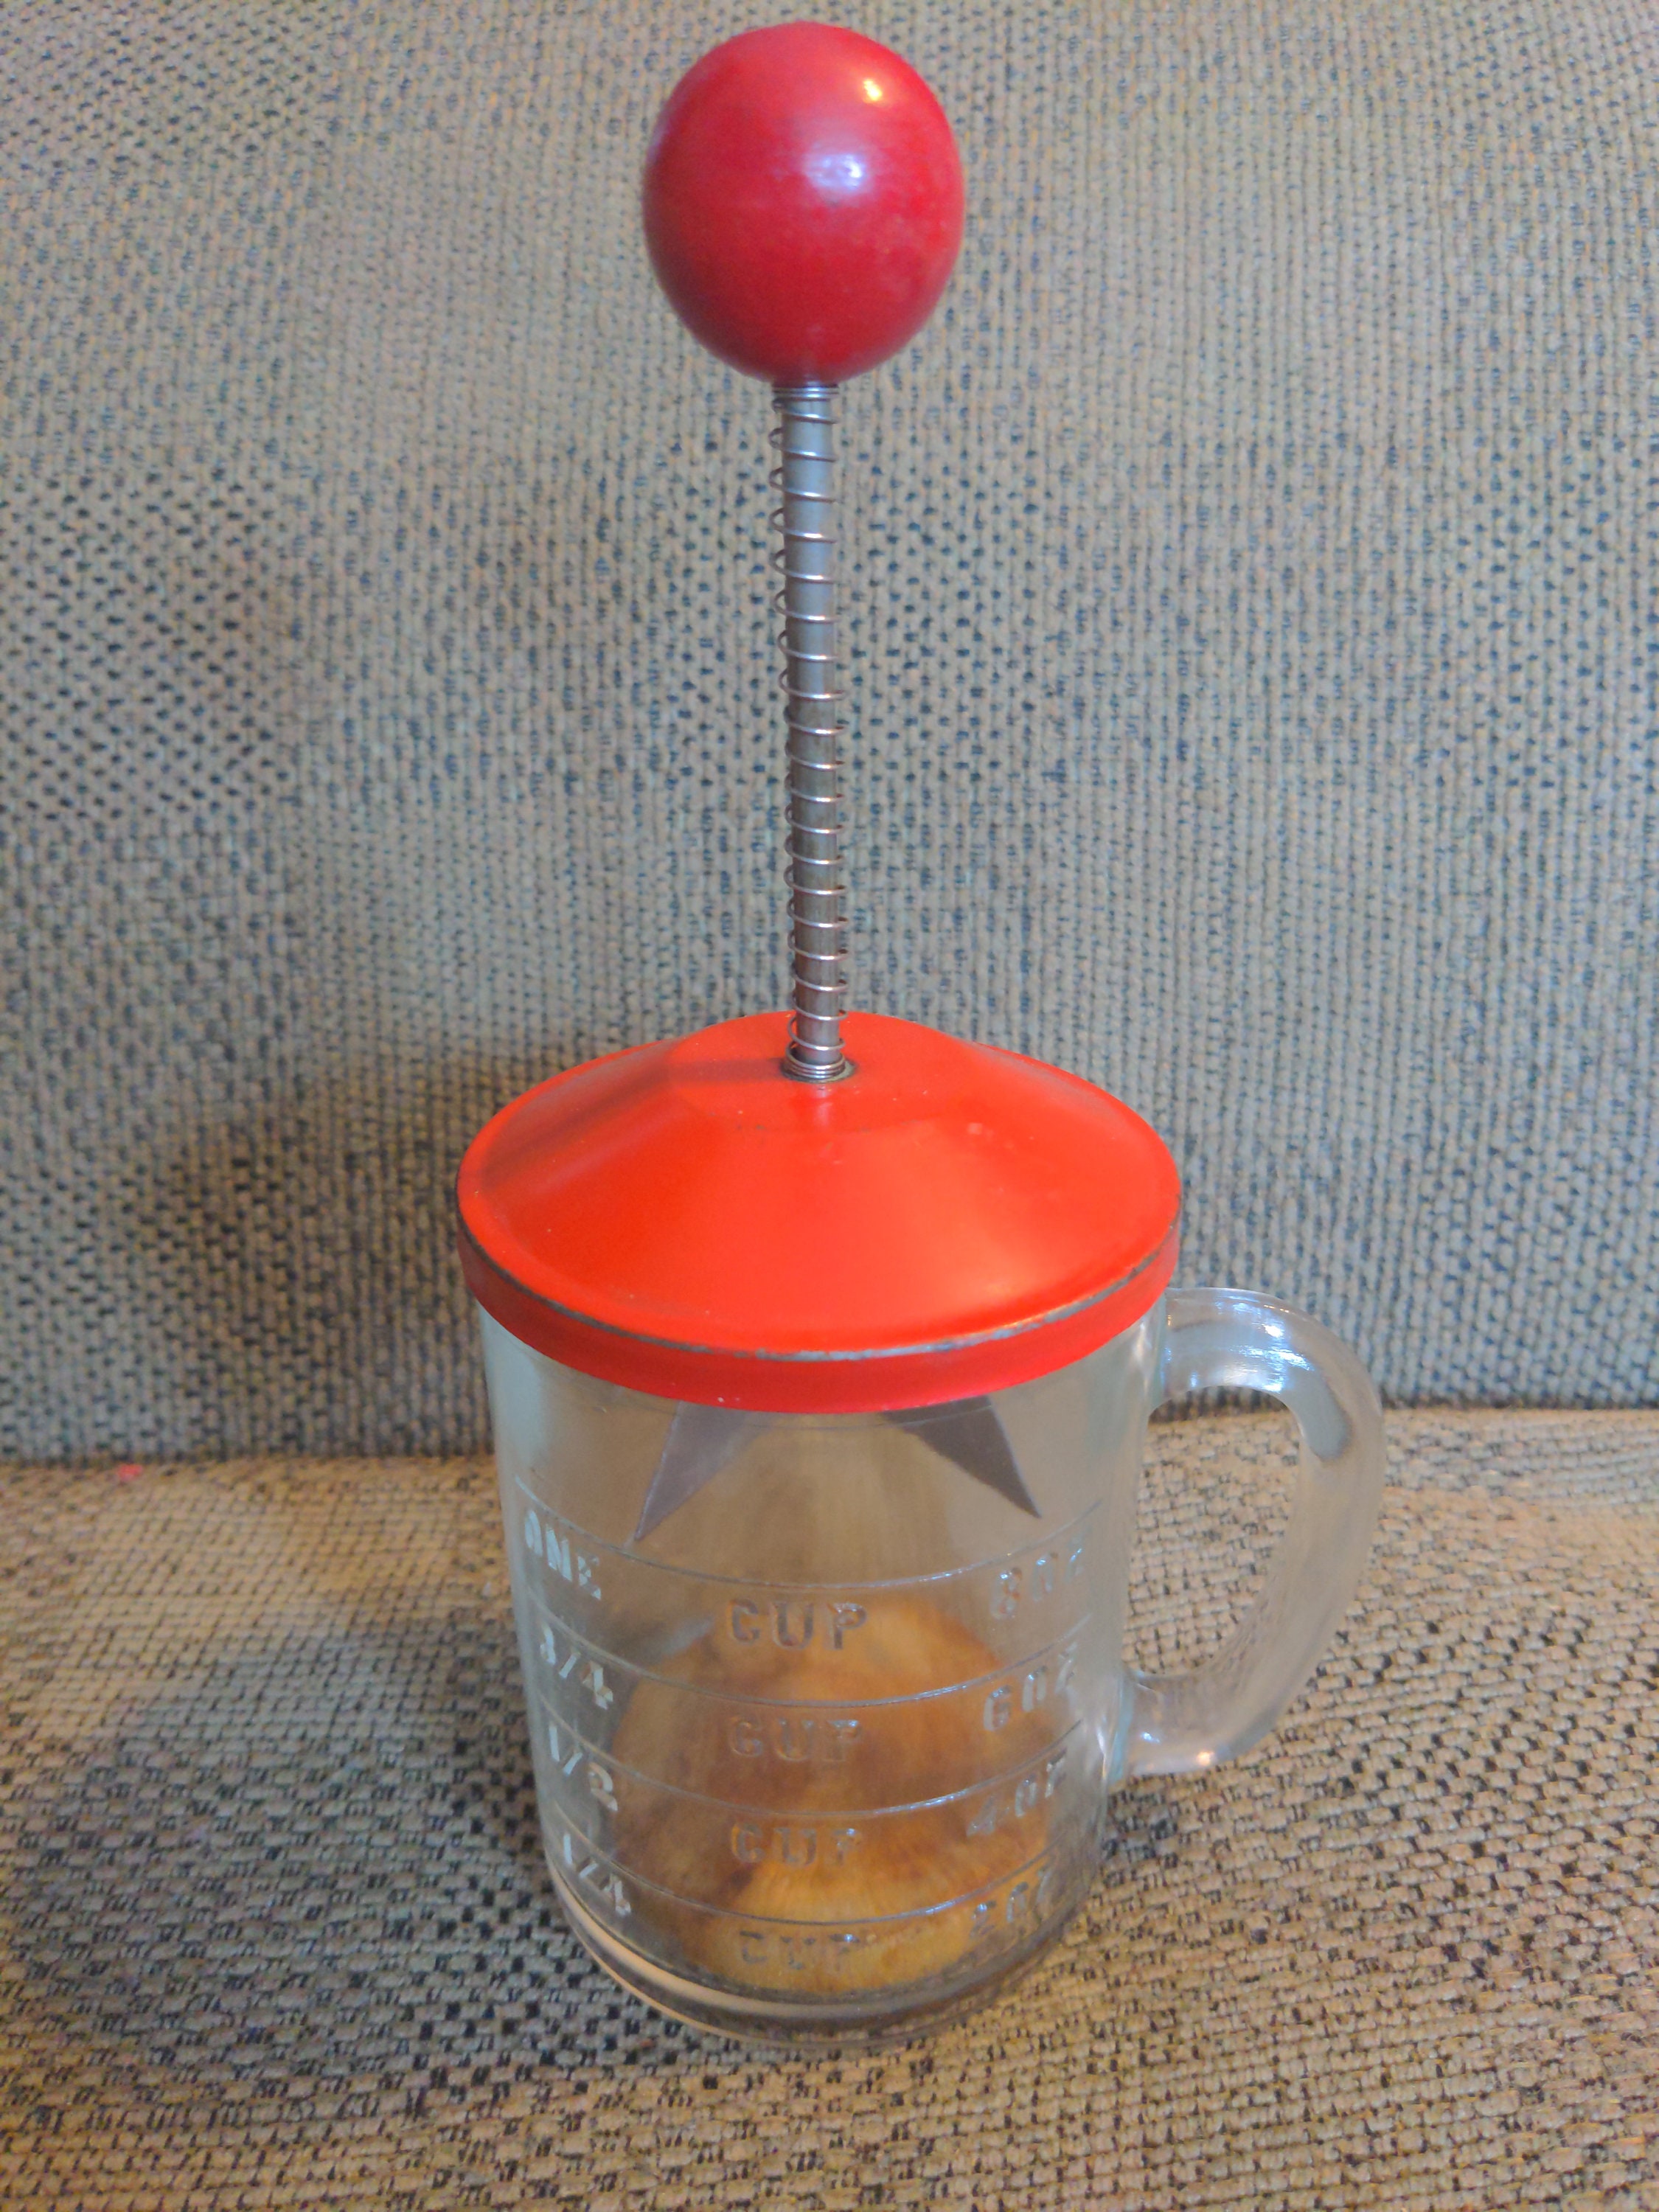 Vintage Glass Hand Crank Nut Chopper Grinder with Plastic Measuring Cup Top  6”